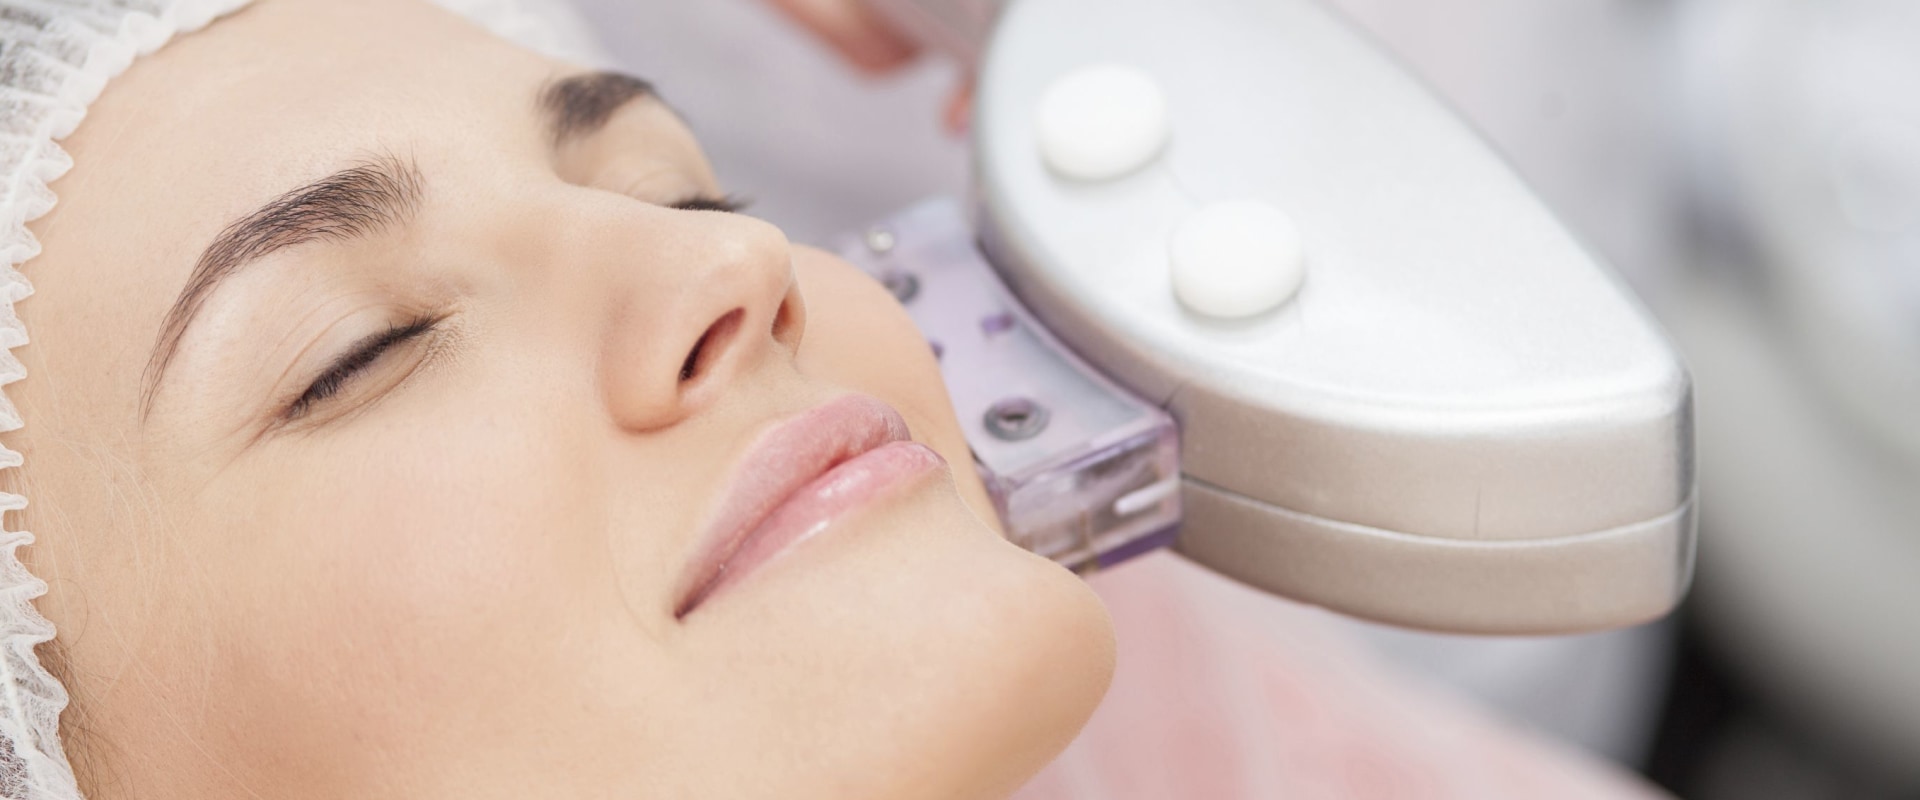 Beauty Treatments for People with Medical Conditions: What You Need to Know